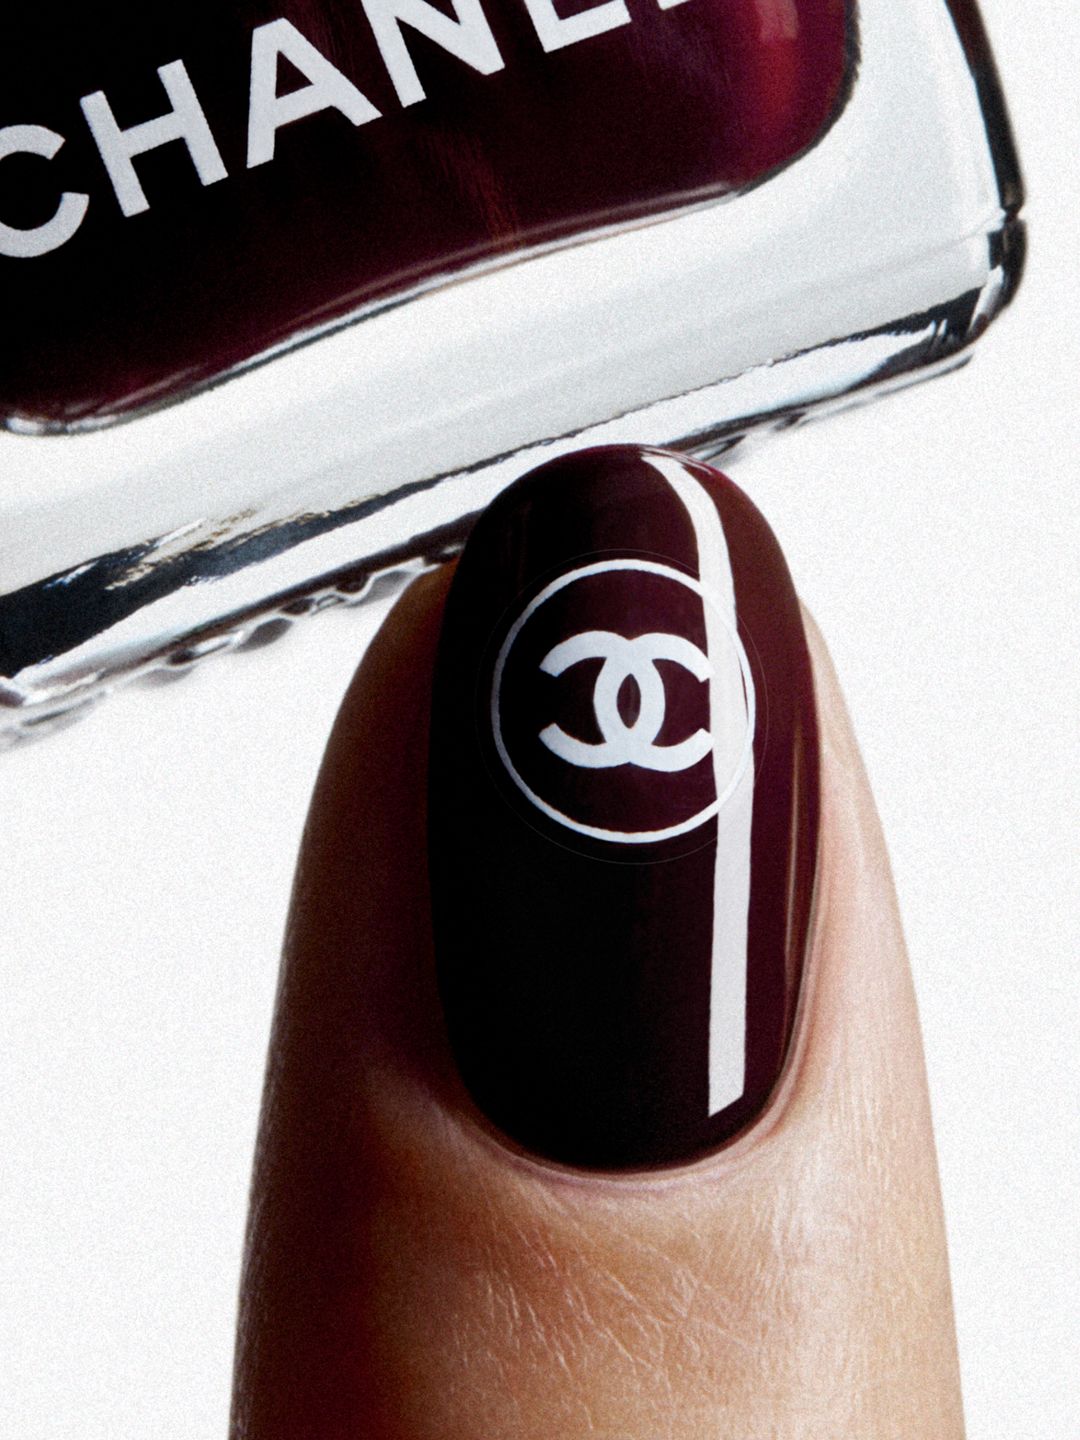 Deep wine-coloured nail polish with white double-C sticker 